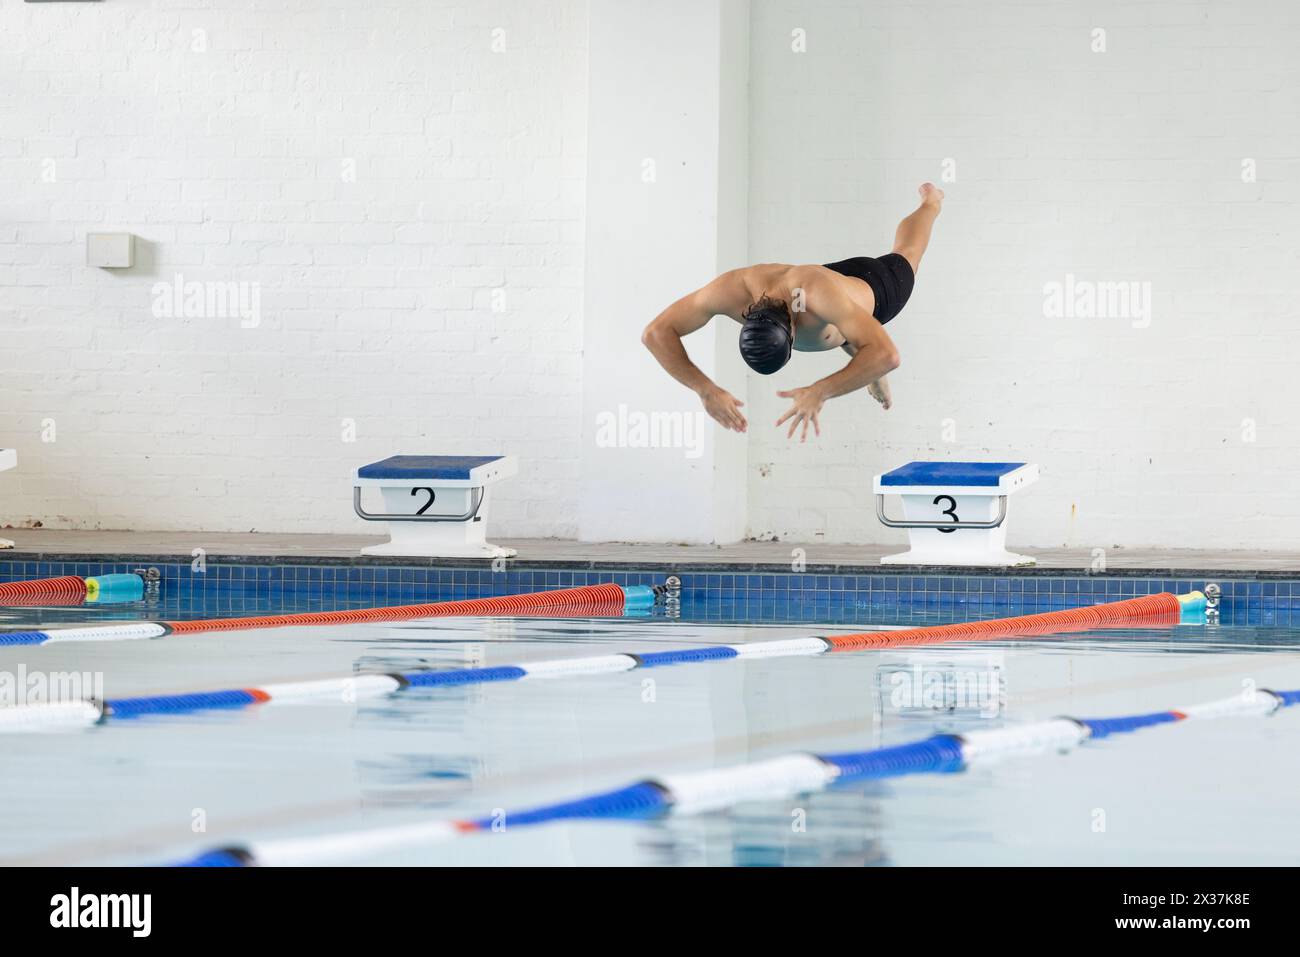 Caucasian young male swimmer diving into indoor swimming pool, wearing black cap, copy space Stock Photo